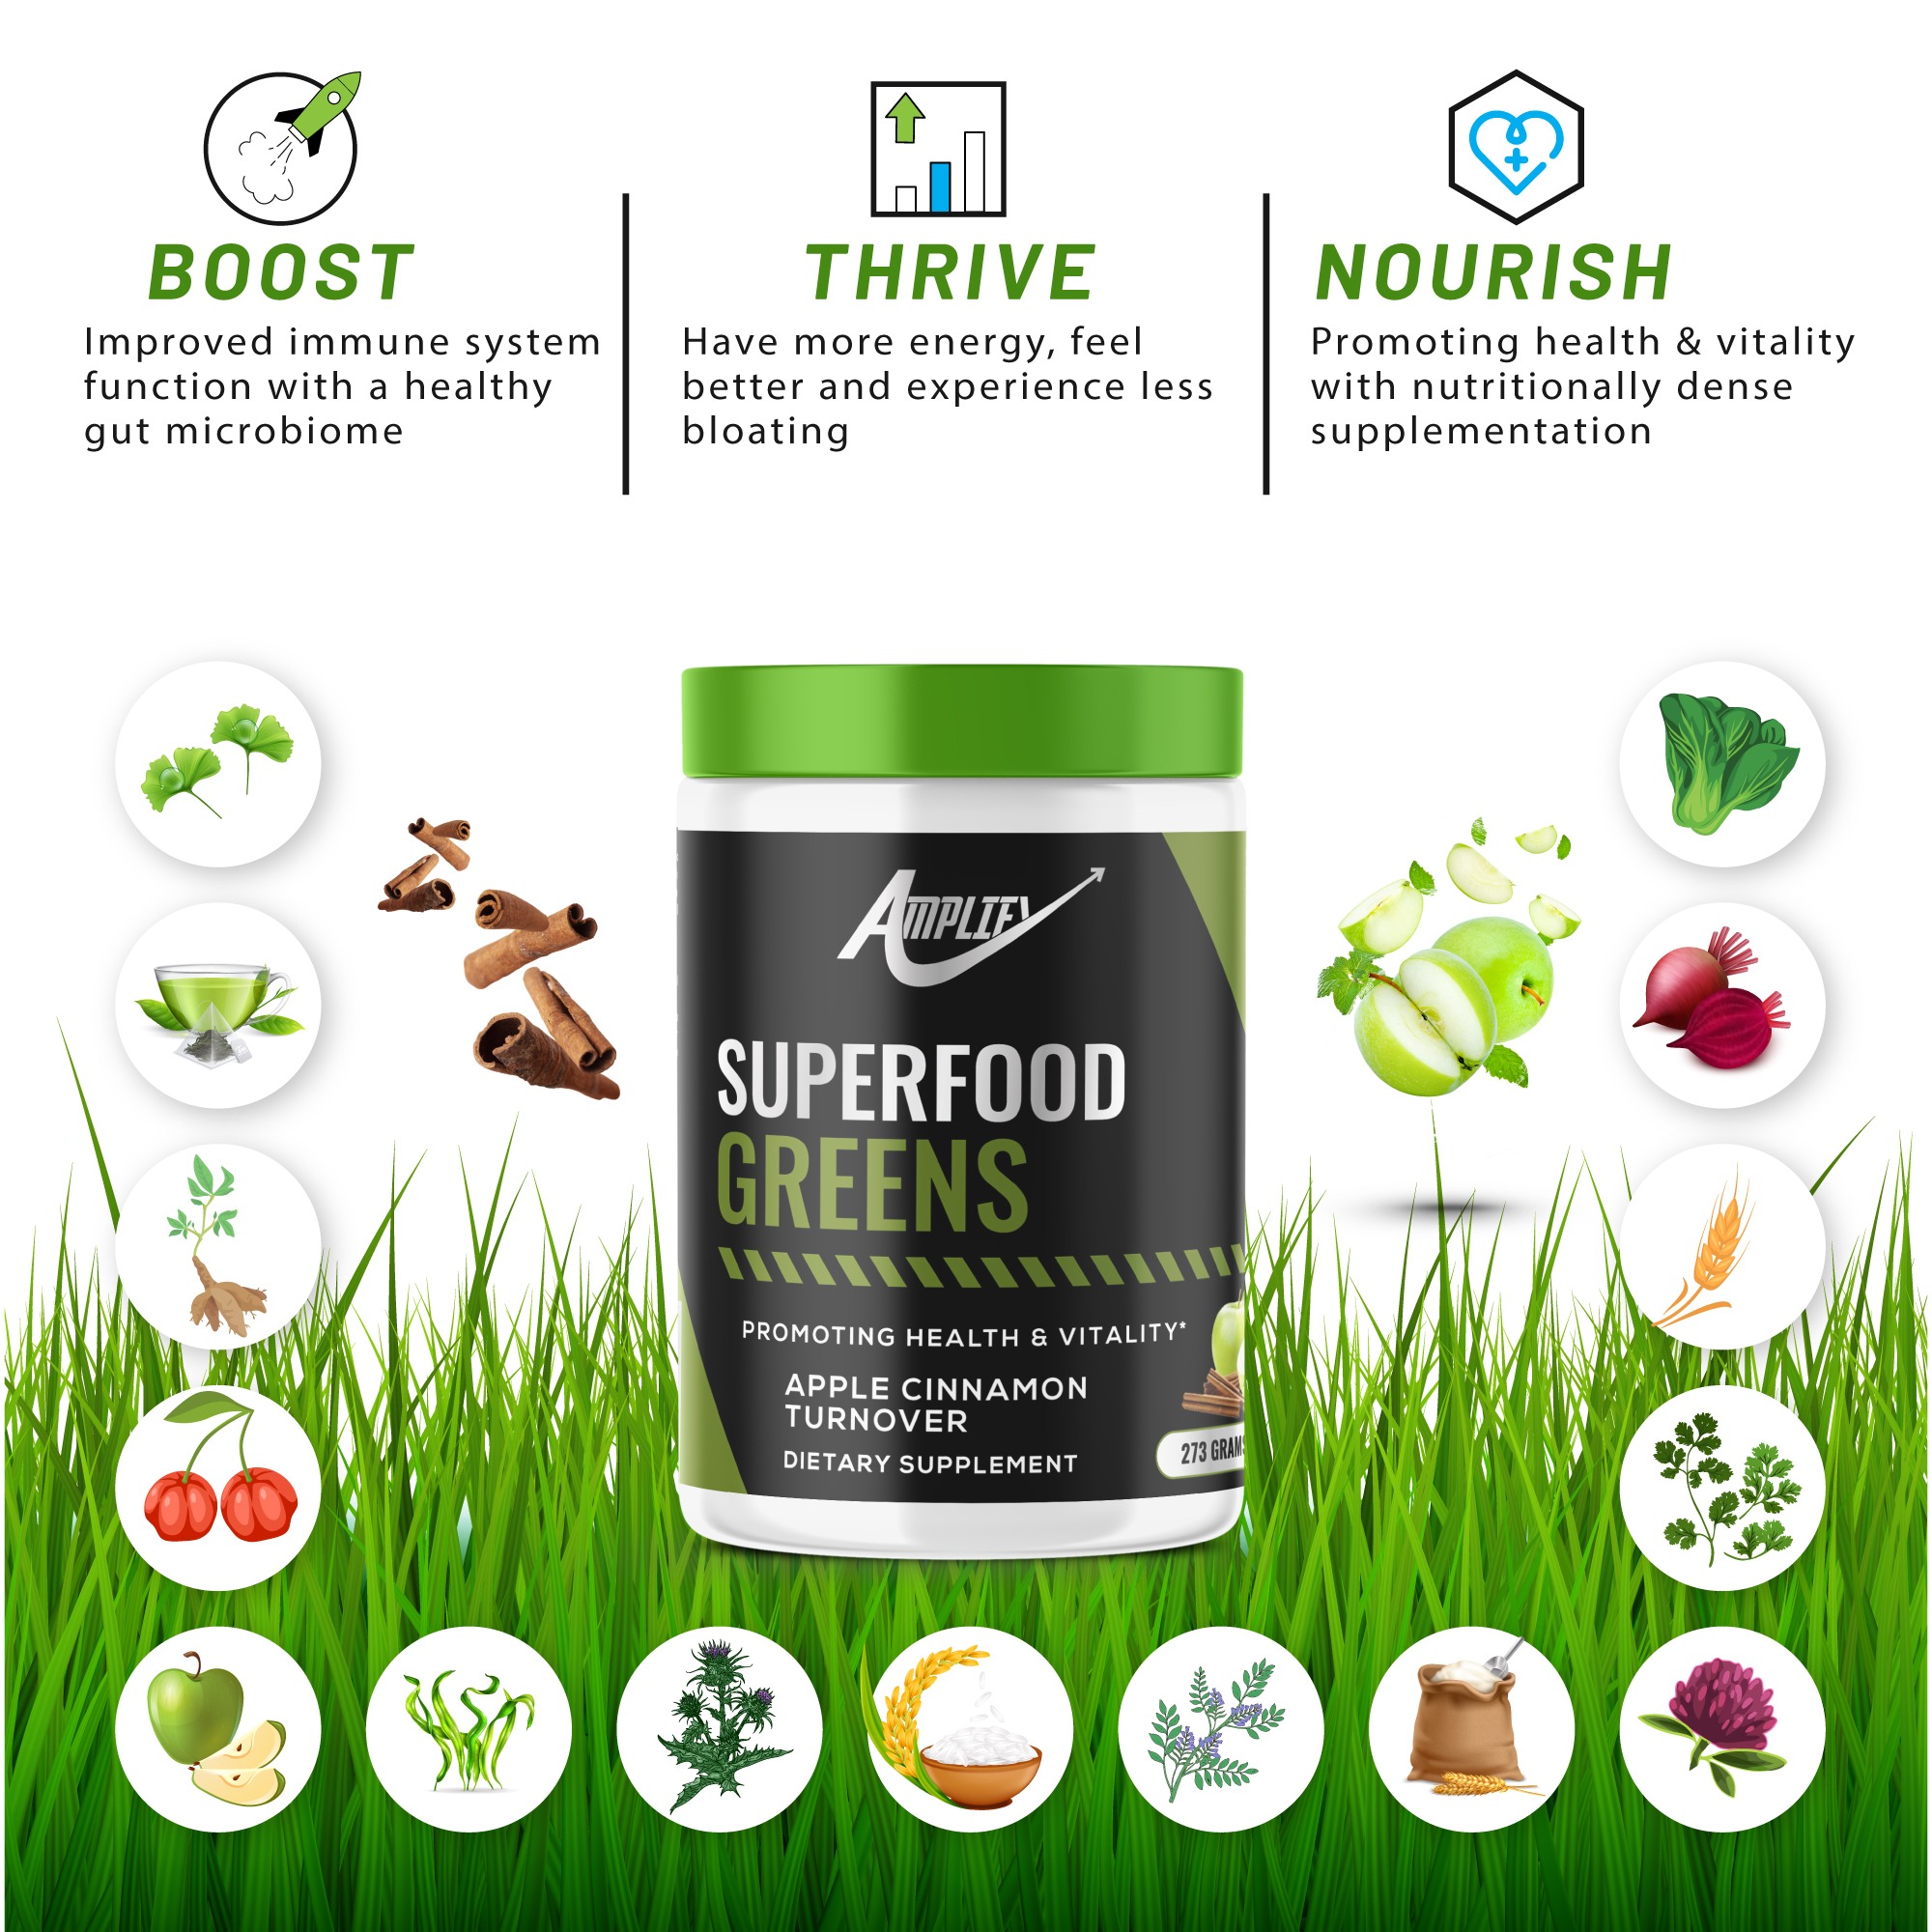 - Boost - Improved immune system function with a healthy gut microbiome - Nourish - promoting health & vitality with nutritionally dense supplementation - Thrive - have more energy, feel better and experience less bloating